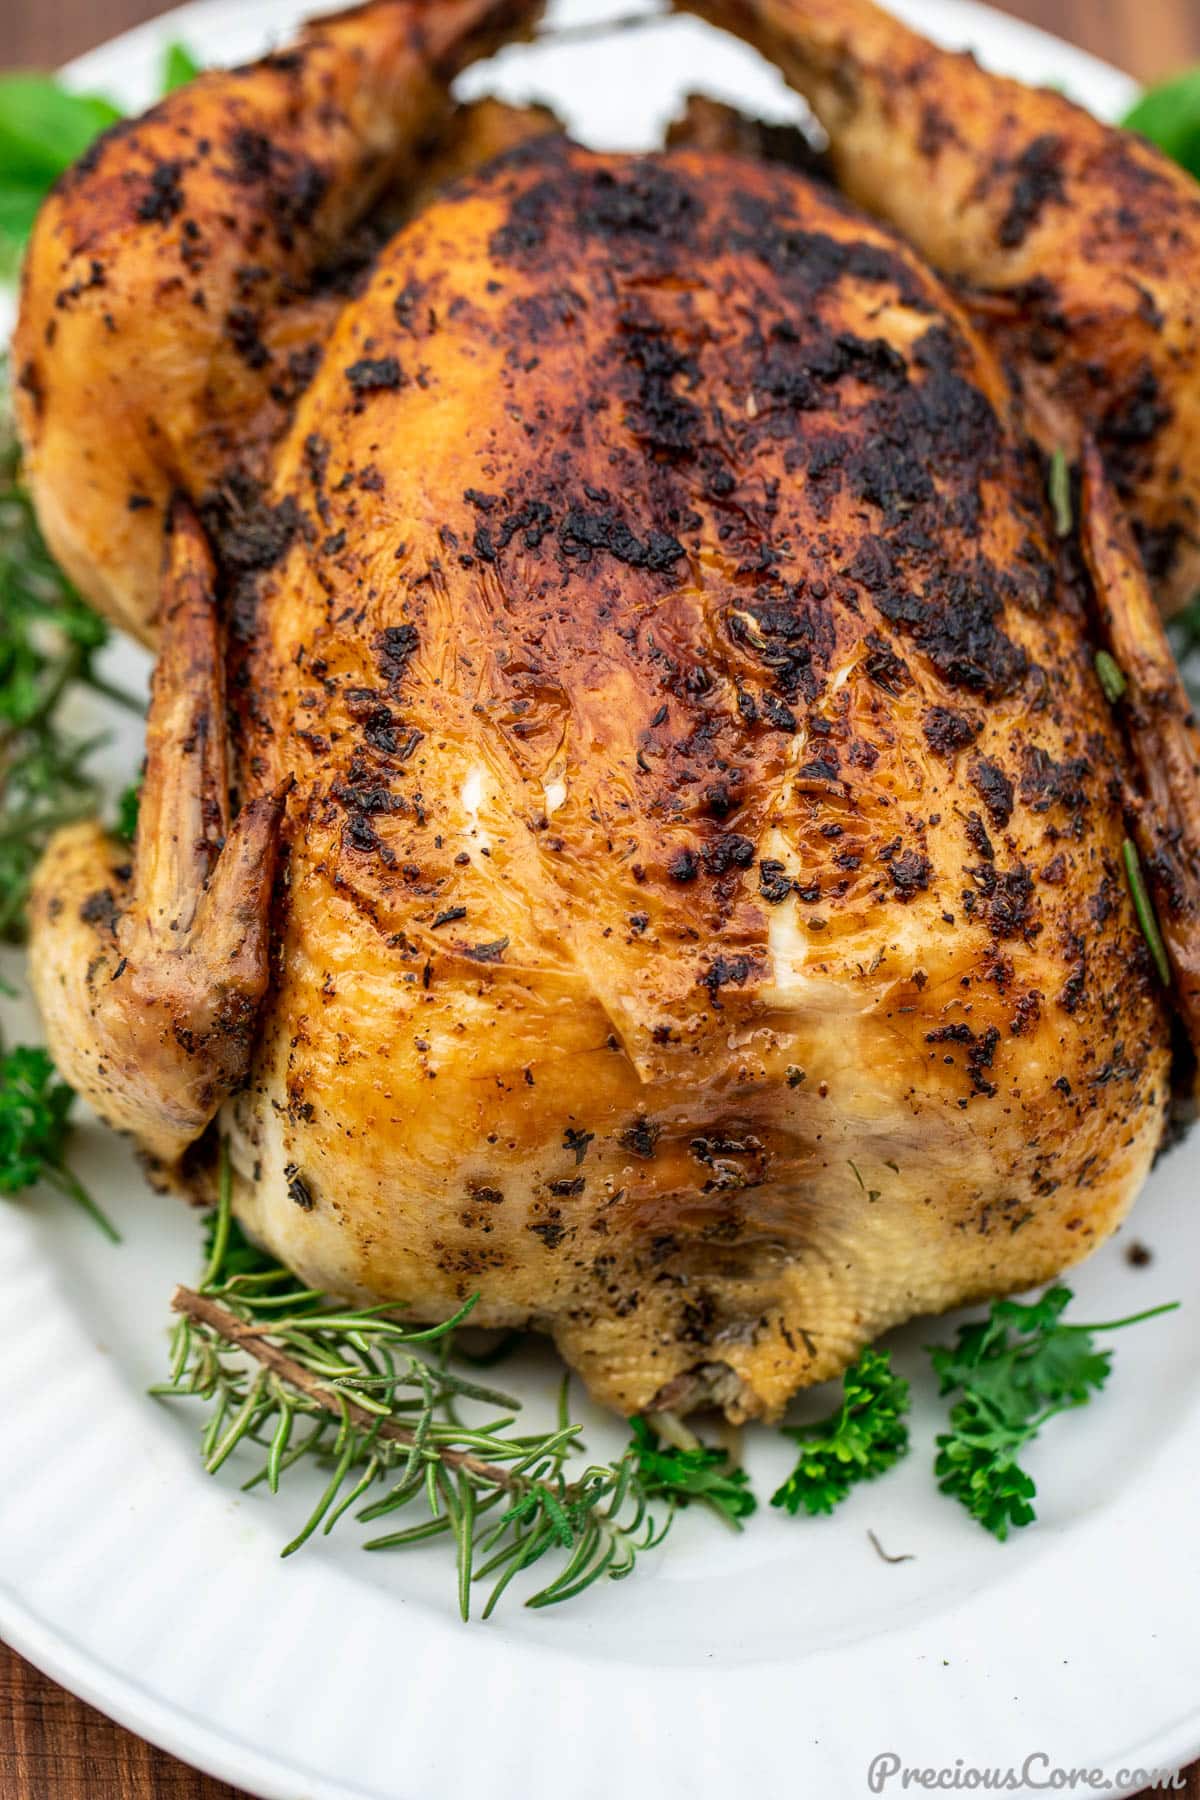 Whole herb roasted chicken on a platter, garnished with fresh herbs.